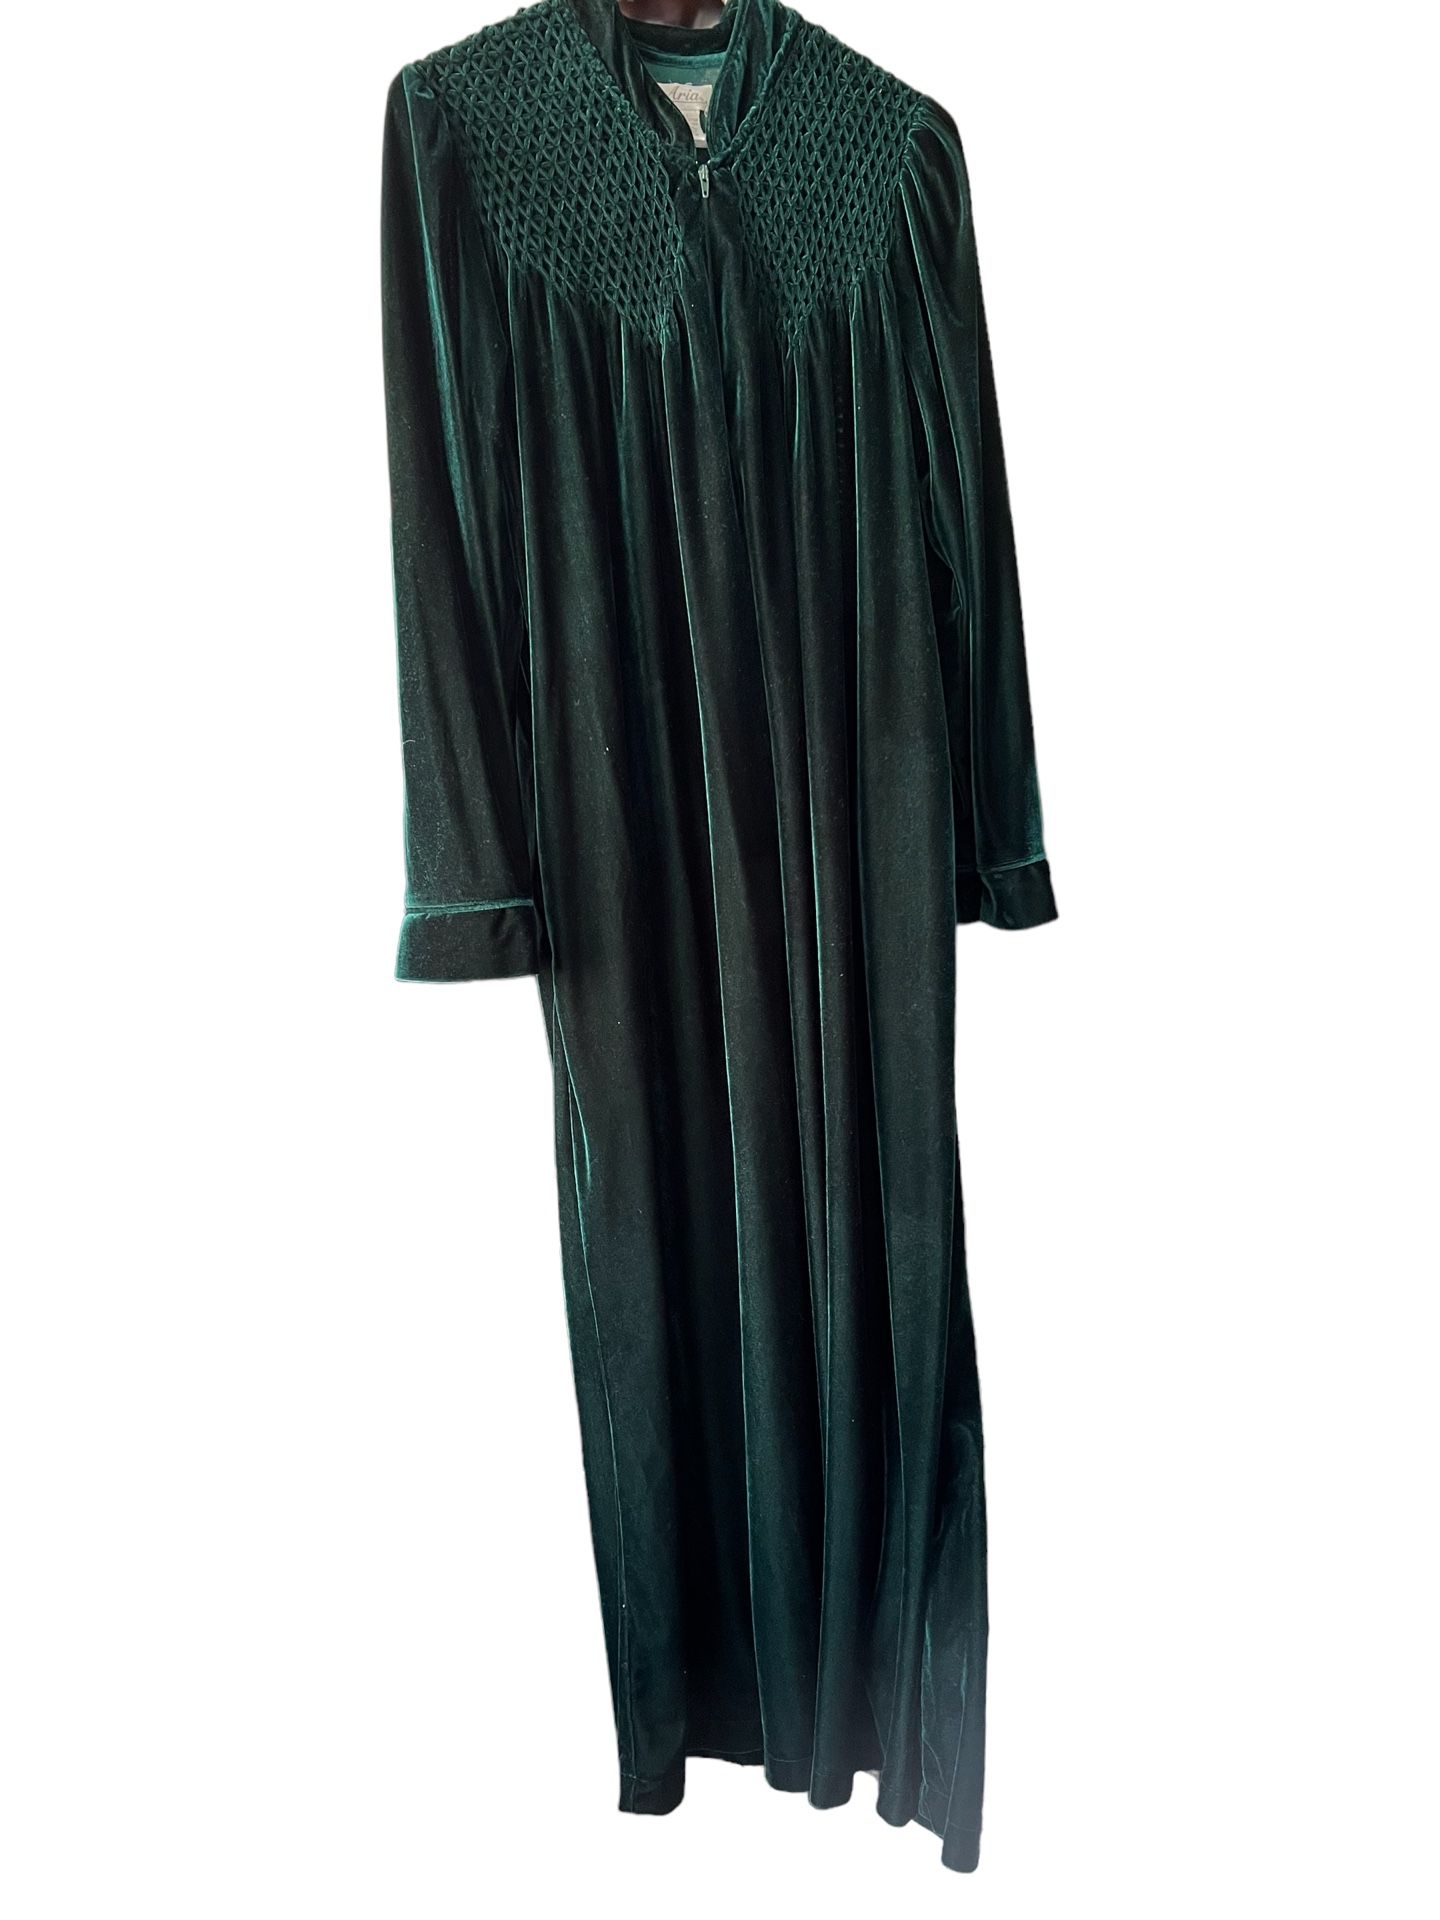 Vintage Aria  Jewel Green Velour House Robe Zip Up Diamond Cut Sz Small Komar.   Robe is a nylon and polyester blend, feels and looks like lightweight